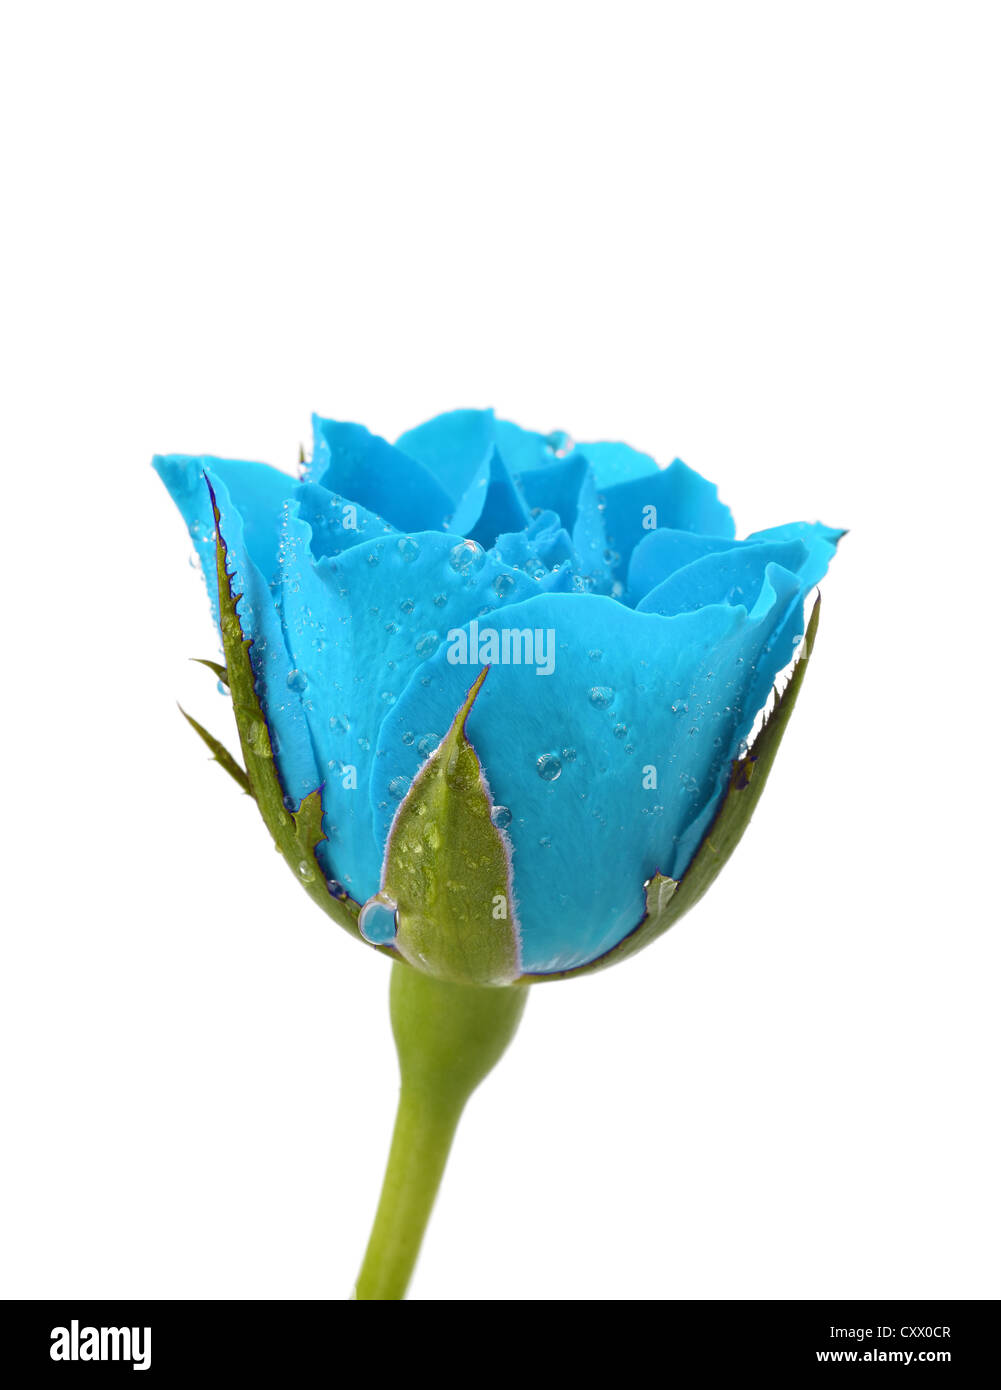 Blue Rose With Drops Of Water On A White Background Stock Photo Alamy